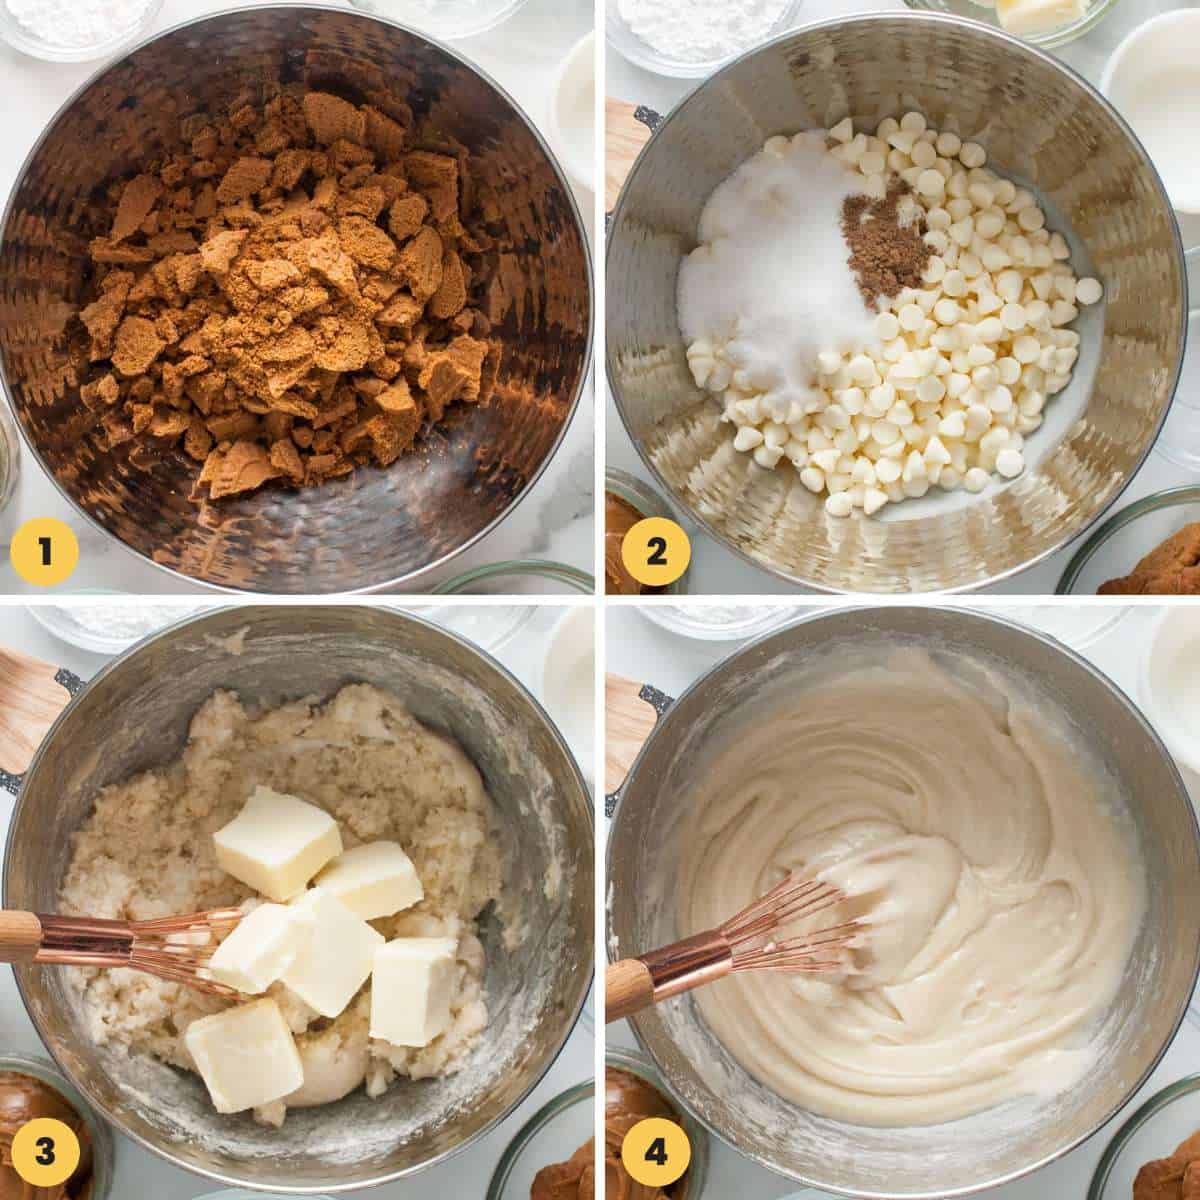 A collage of four images showing how to mix the ingredients to make chocolate salami.